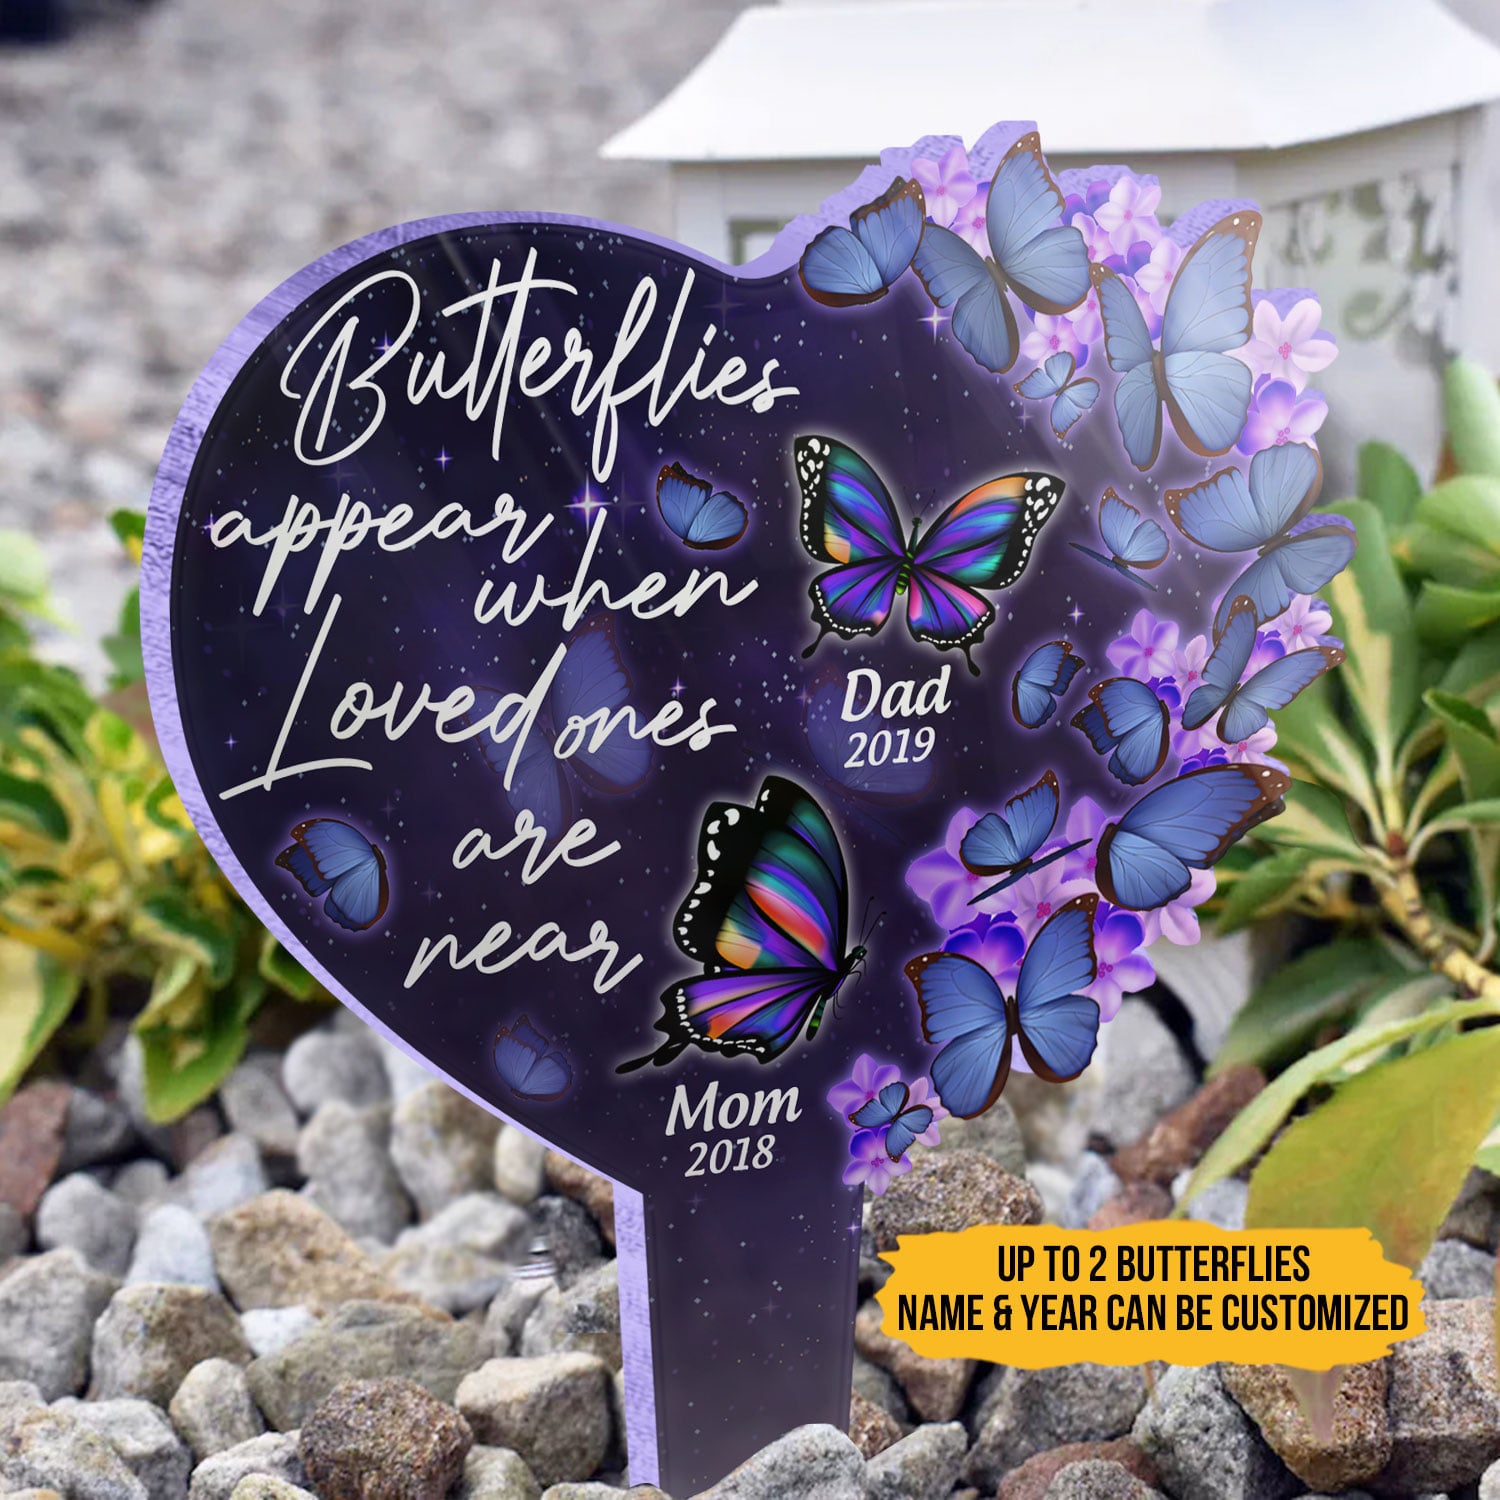 Memorial When Loved Ones Are Near - Memorial Gift - Personalized Custom Heart Acrylic Plaque Stake